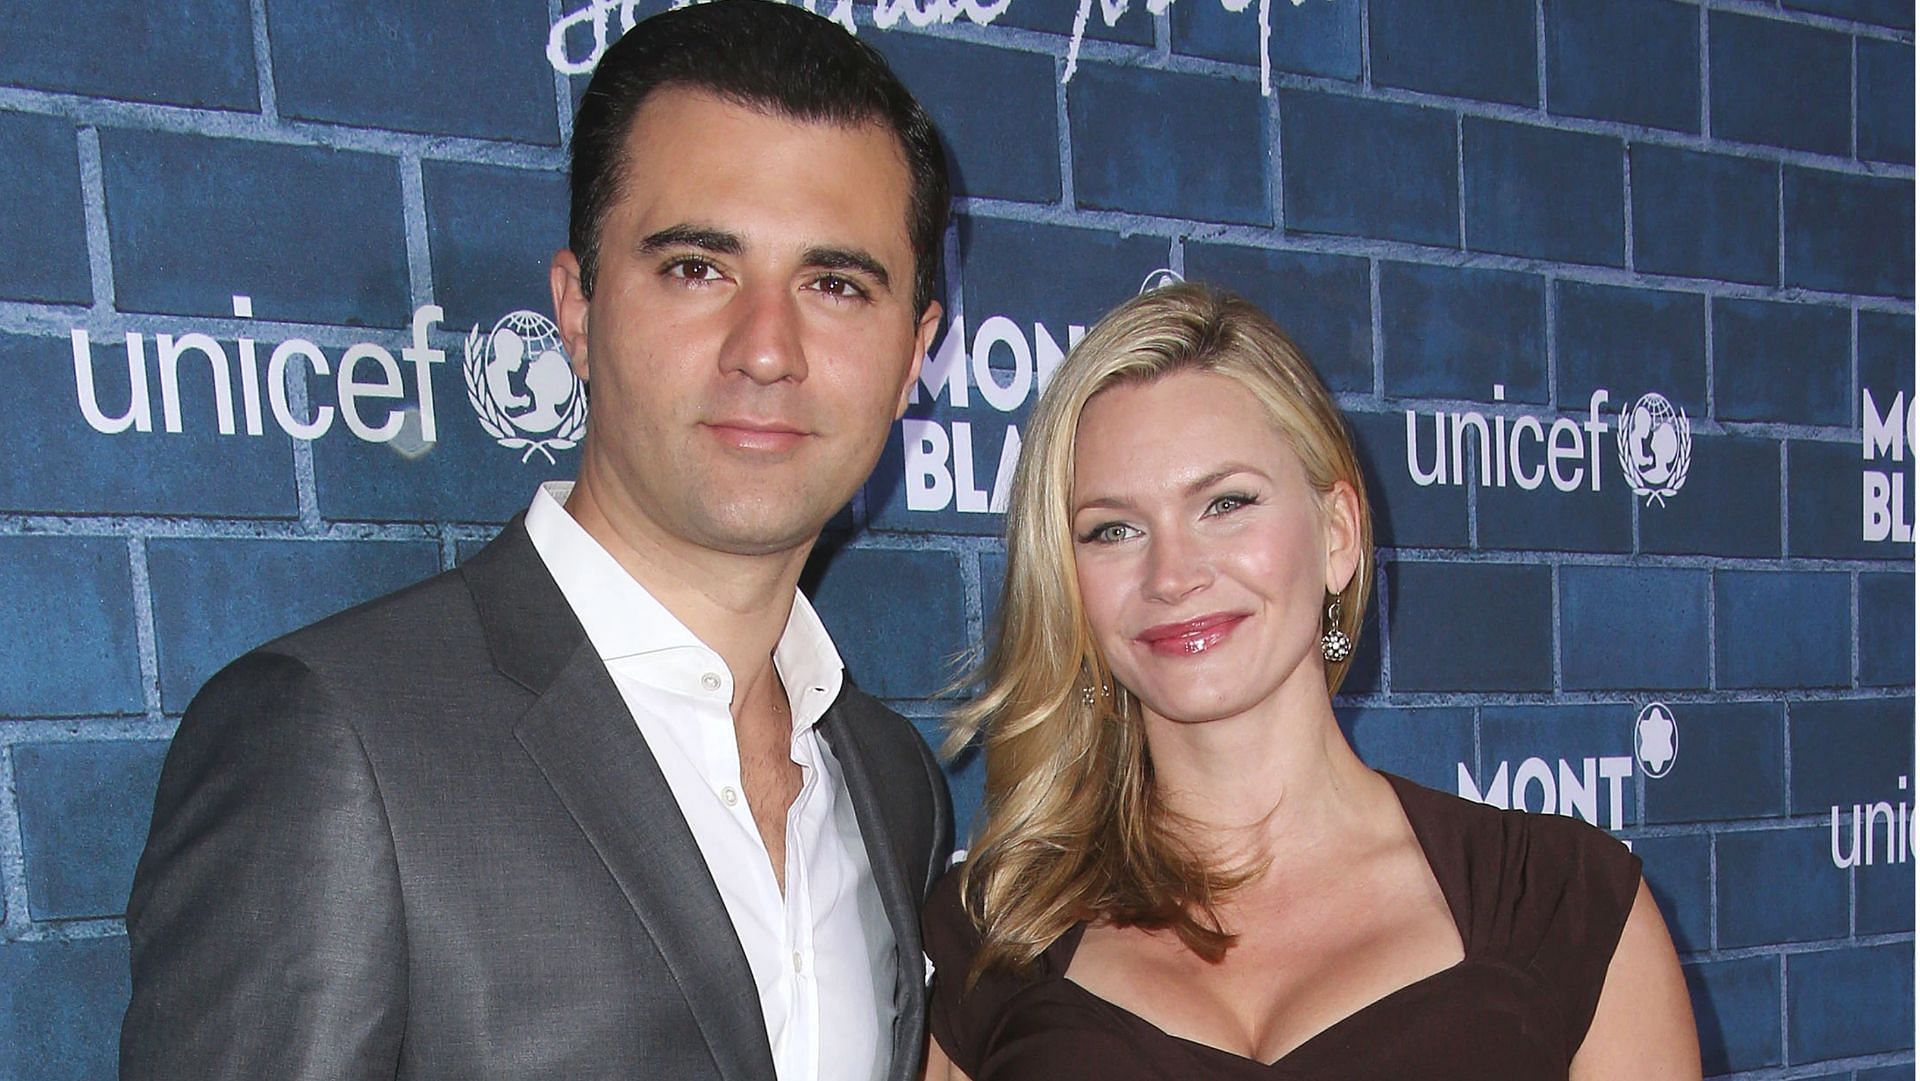 Natasha Henstridge and Darius Campbell-Danesh had an on-and-off relationship for several years until 2018. (Image via Frederick M. Brown/Getty)